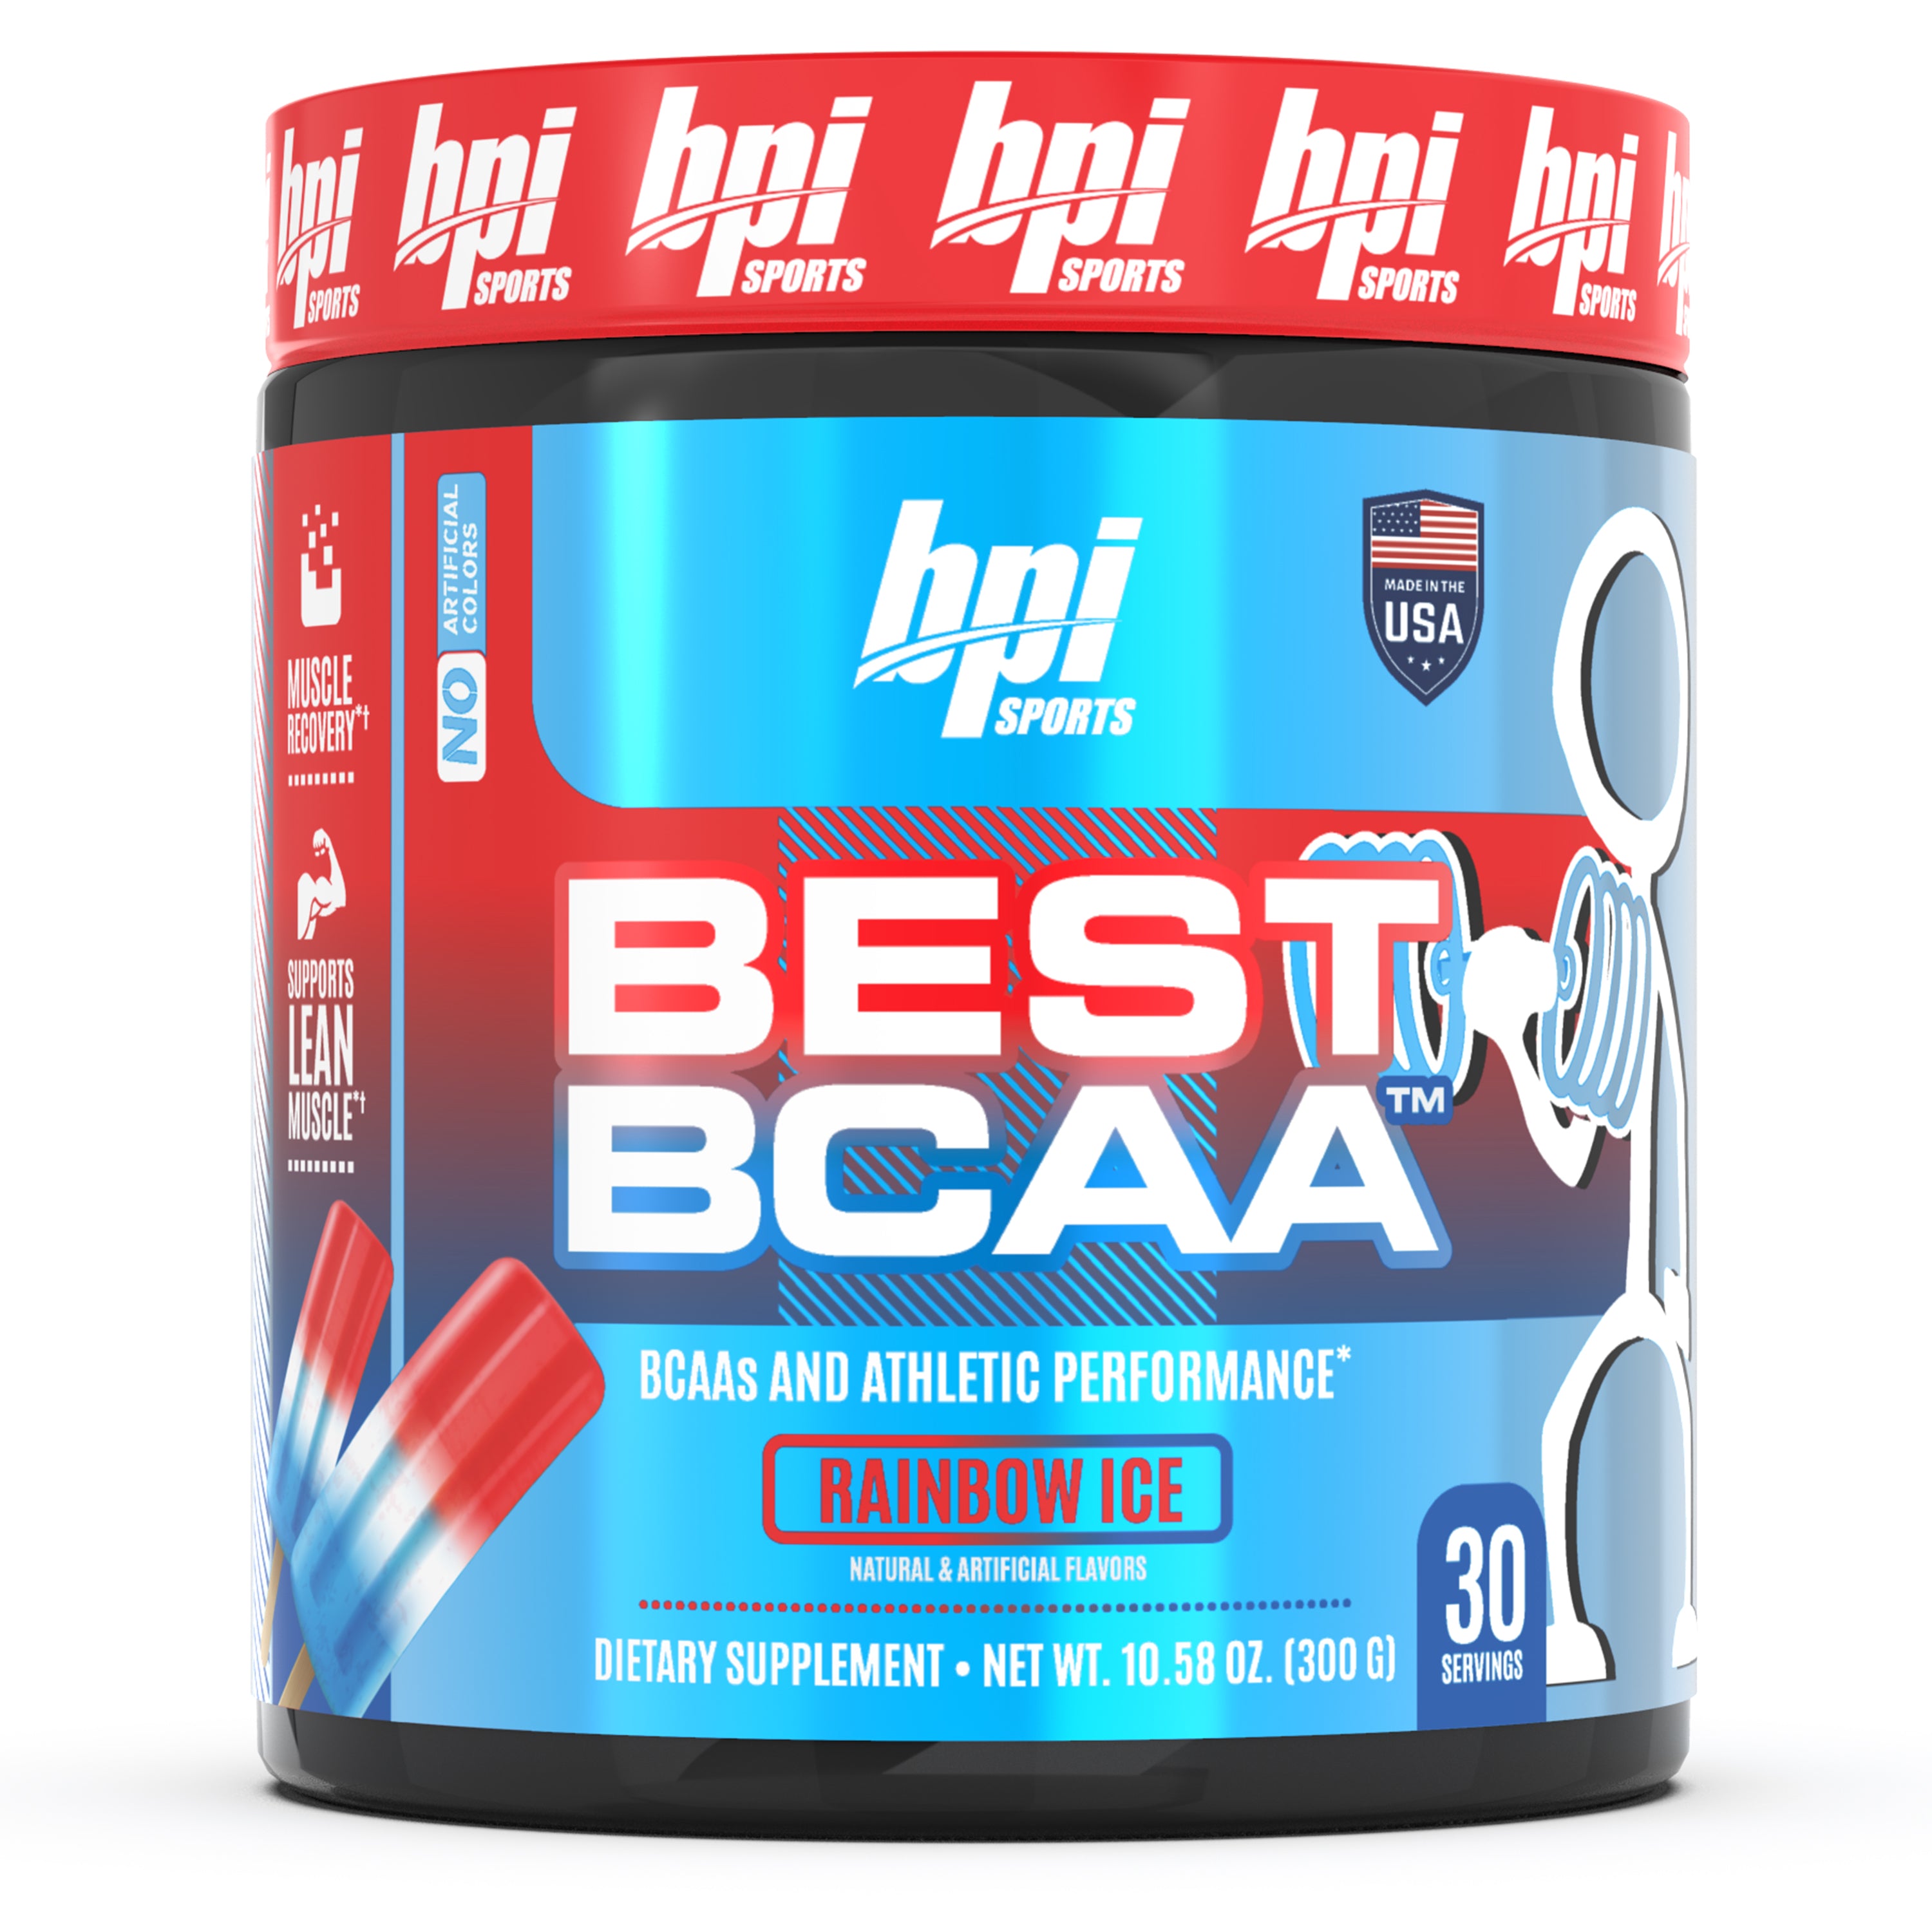 Best BCAA™ - Branched-Chain Amino Acids